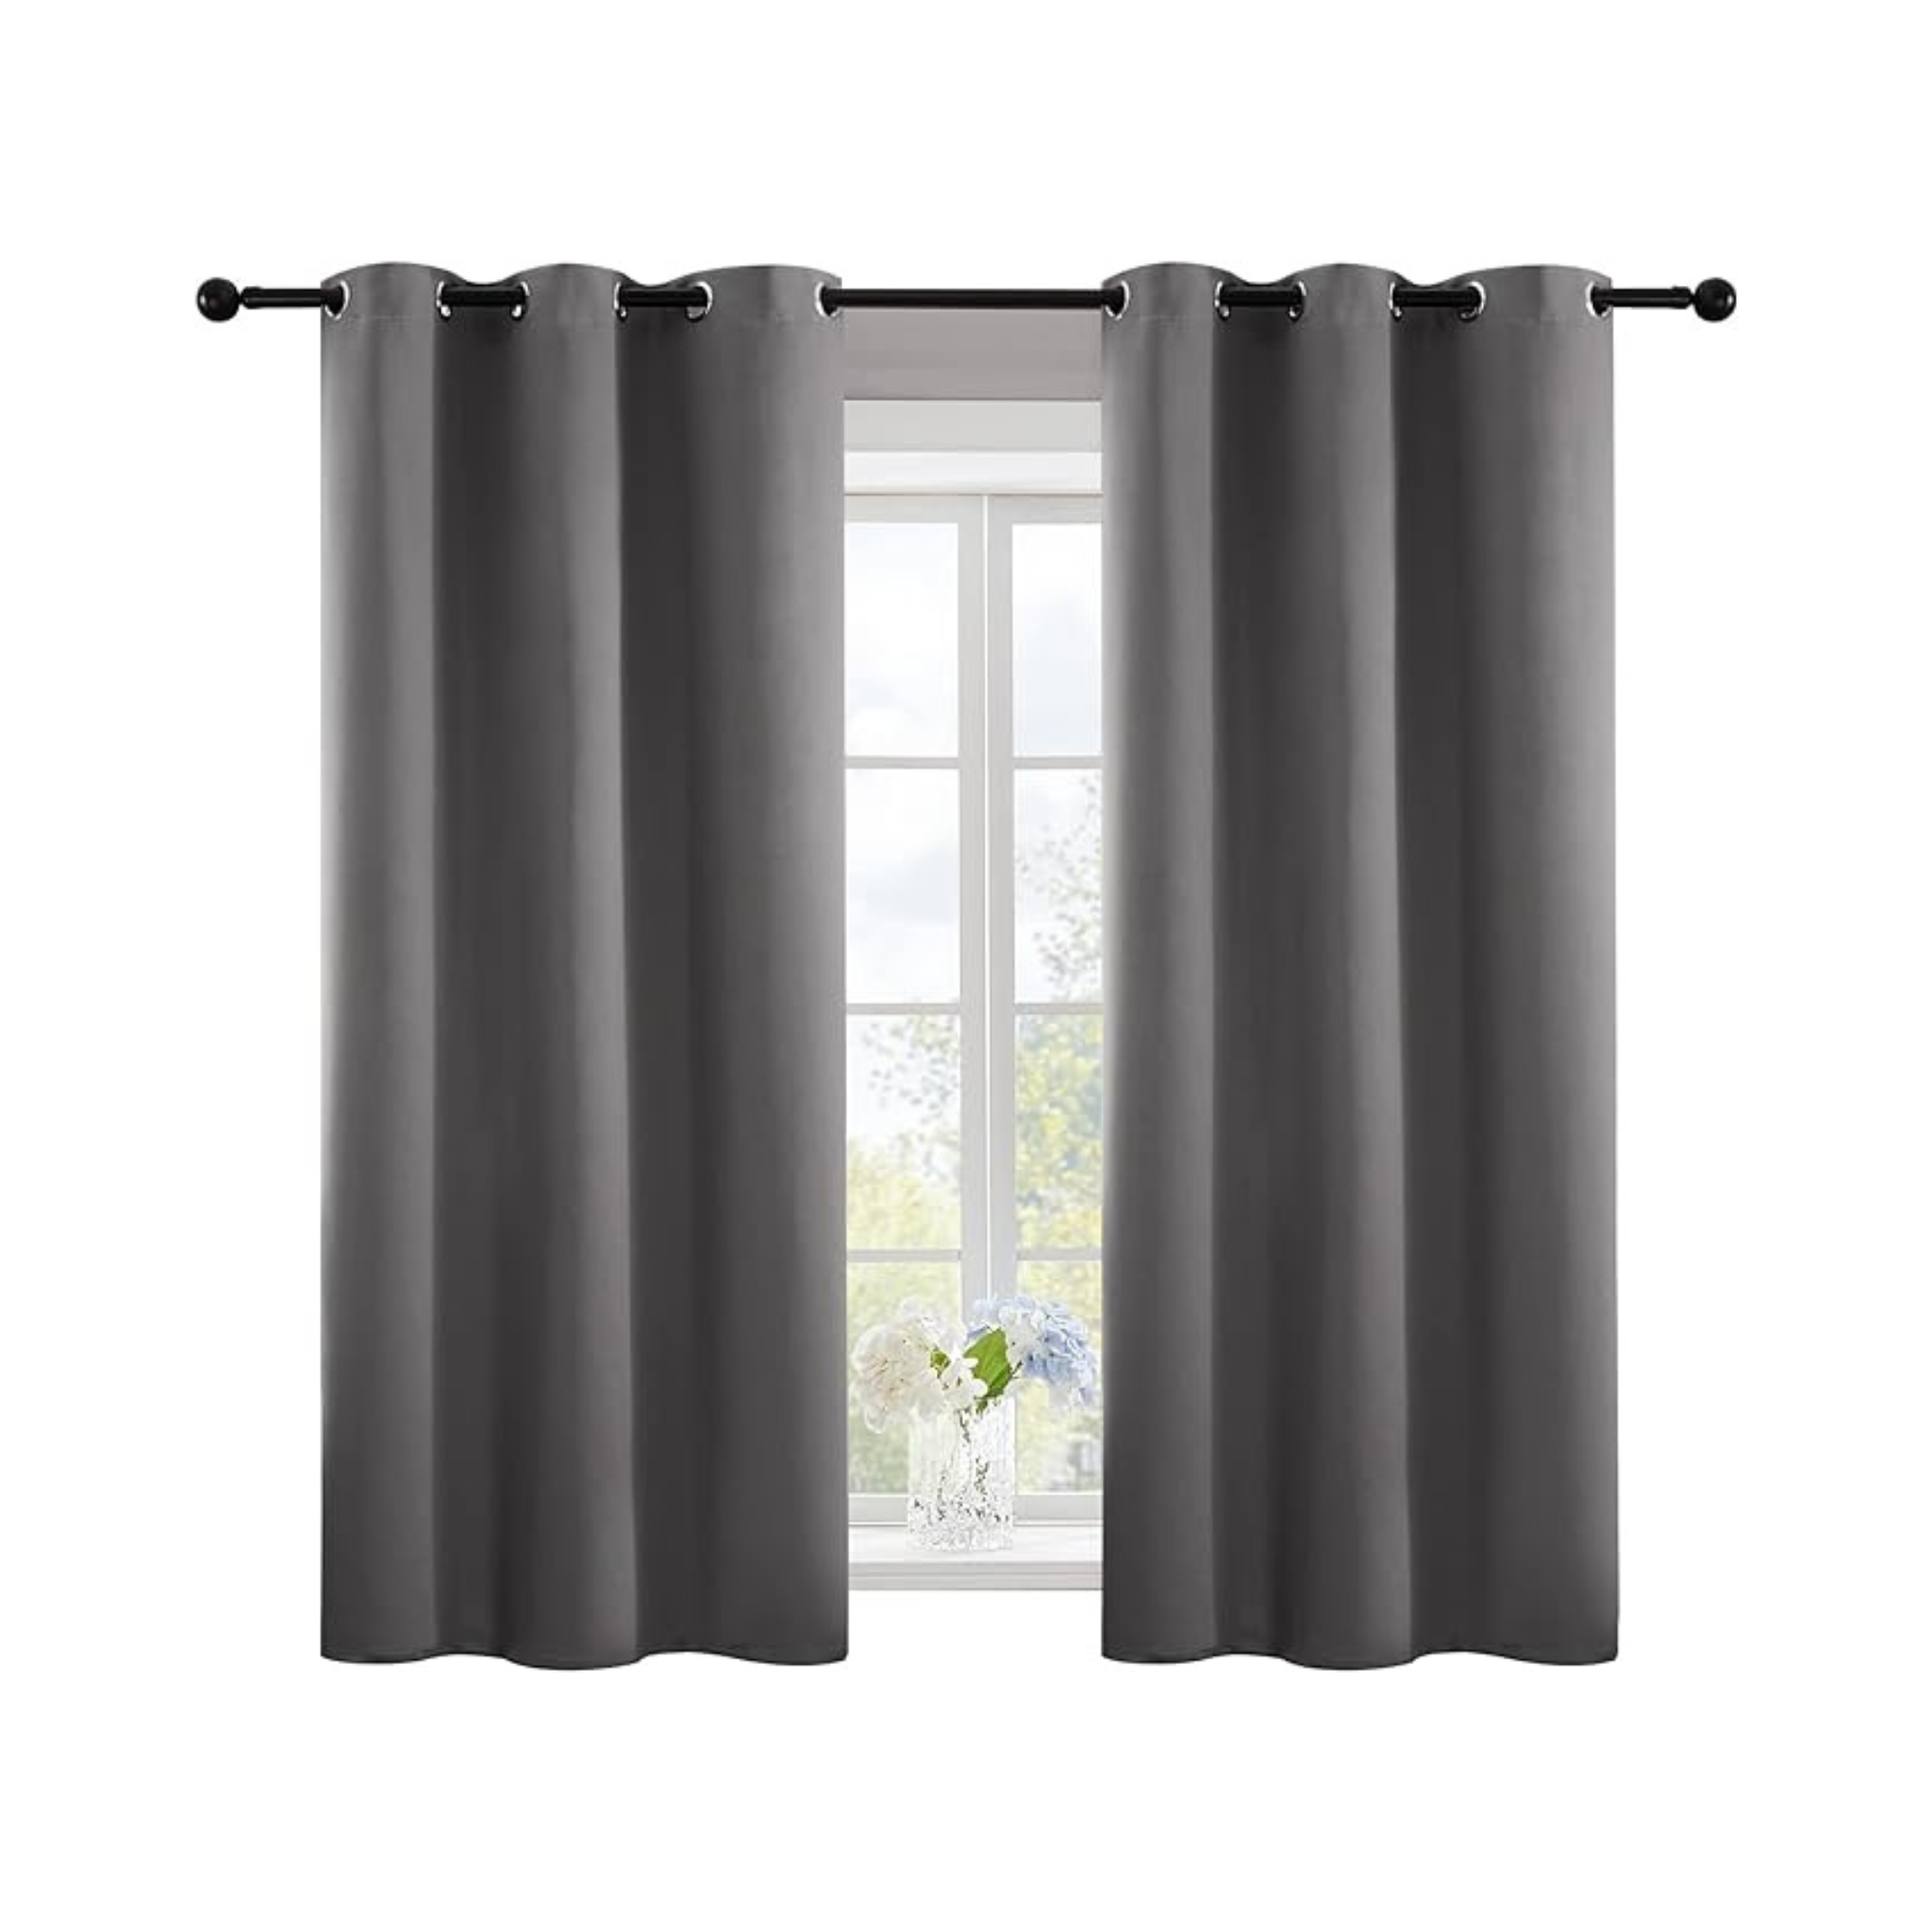 2-Pk Deconovo Solid Thermal Insulated Blackout Curtains